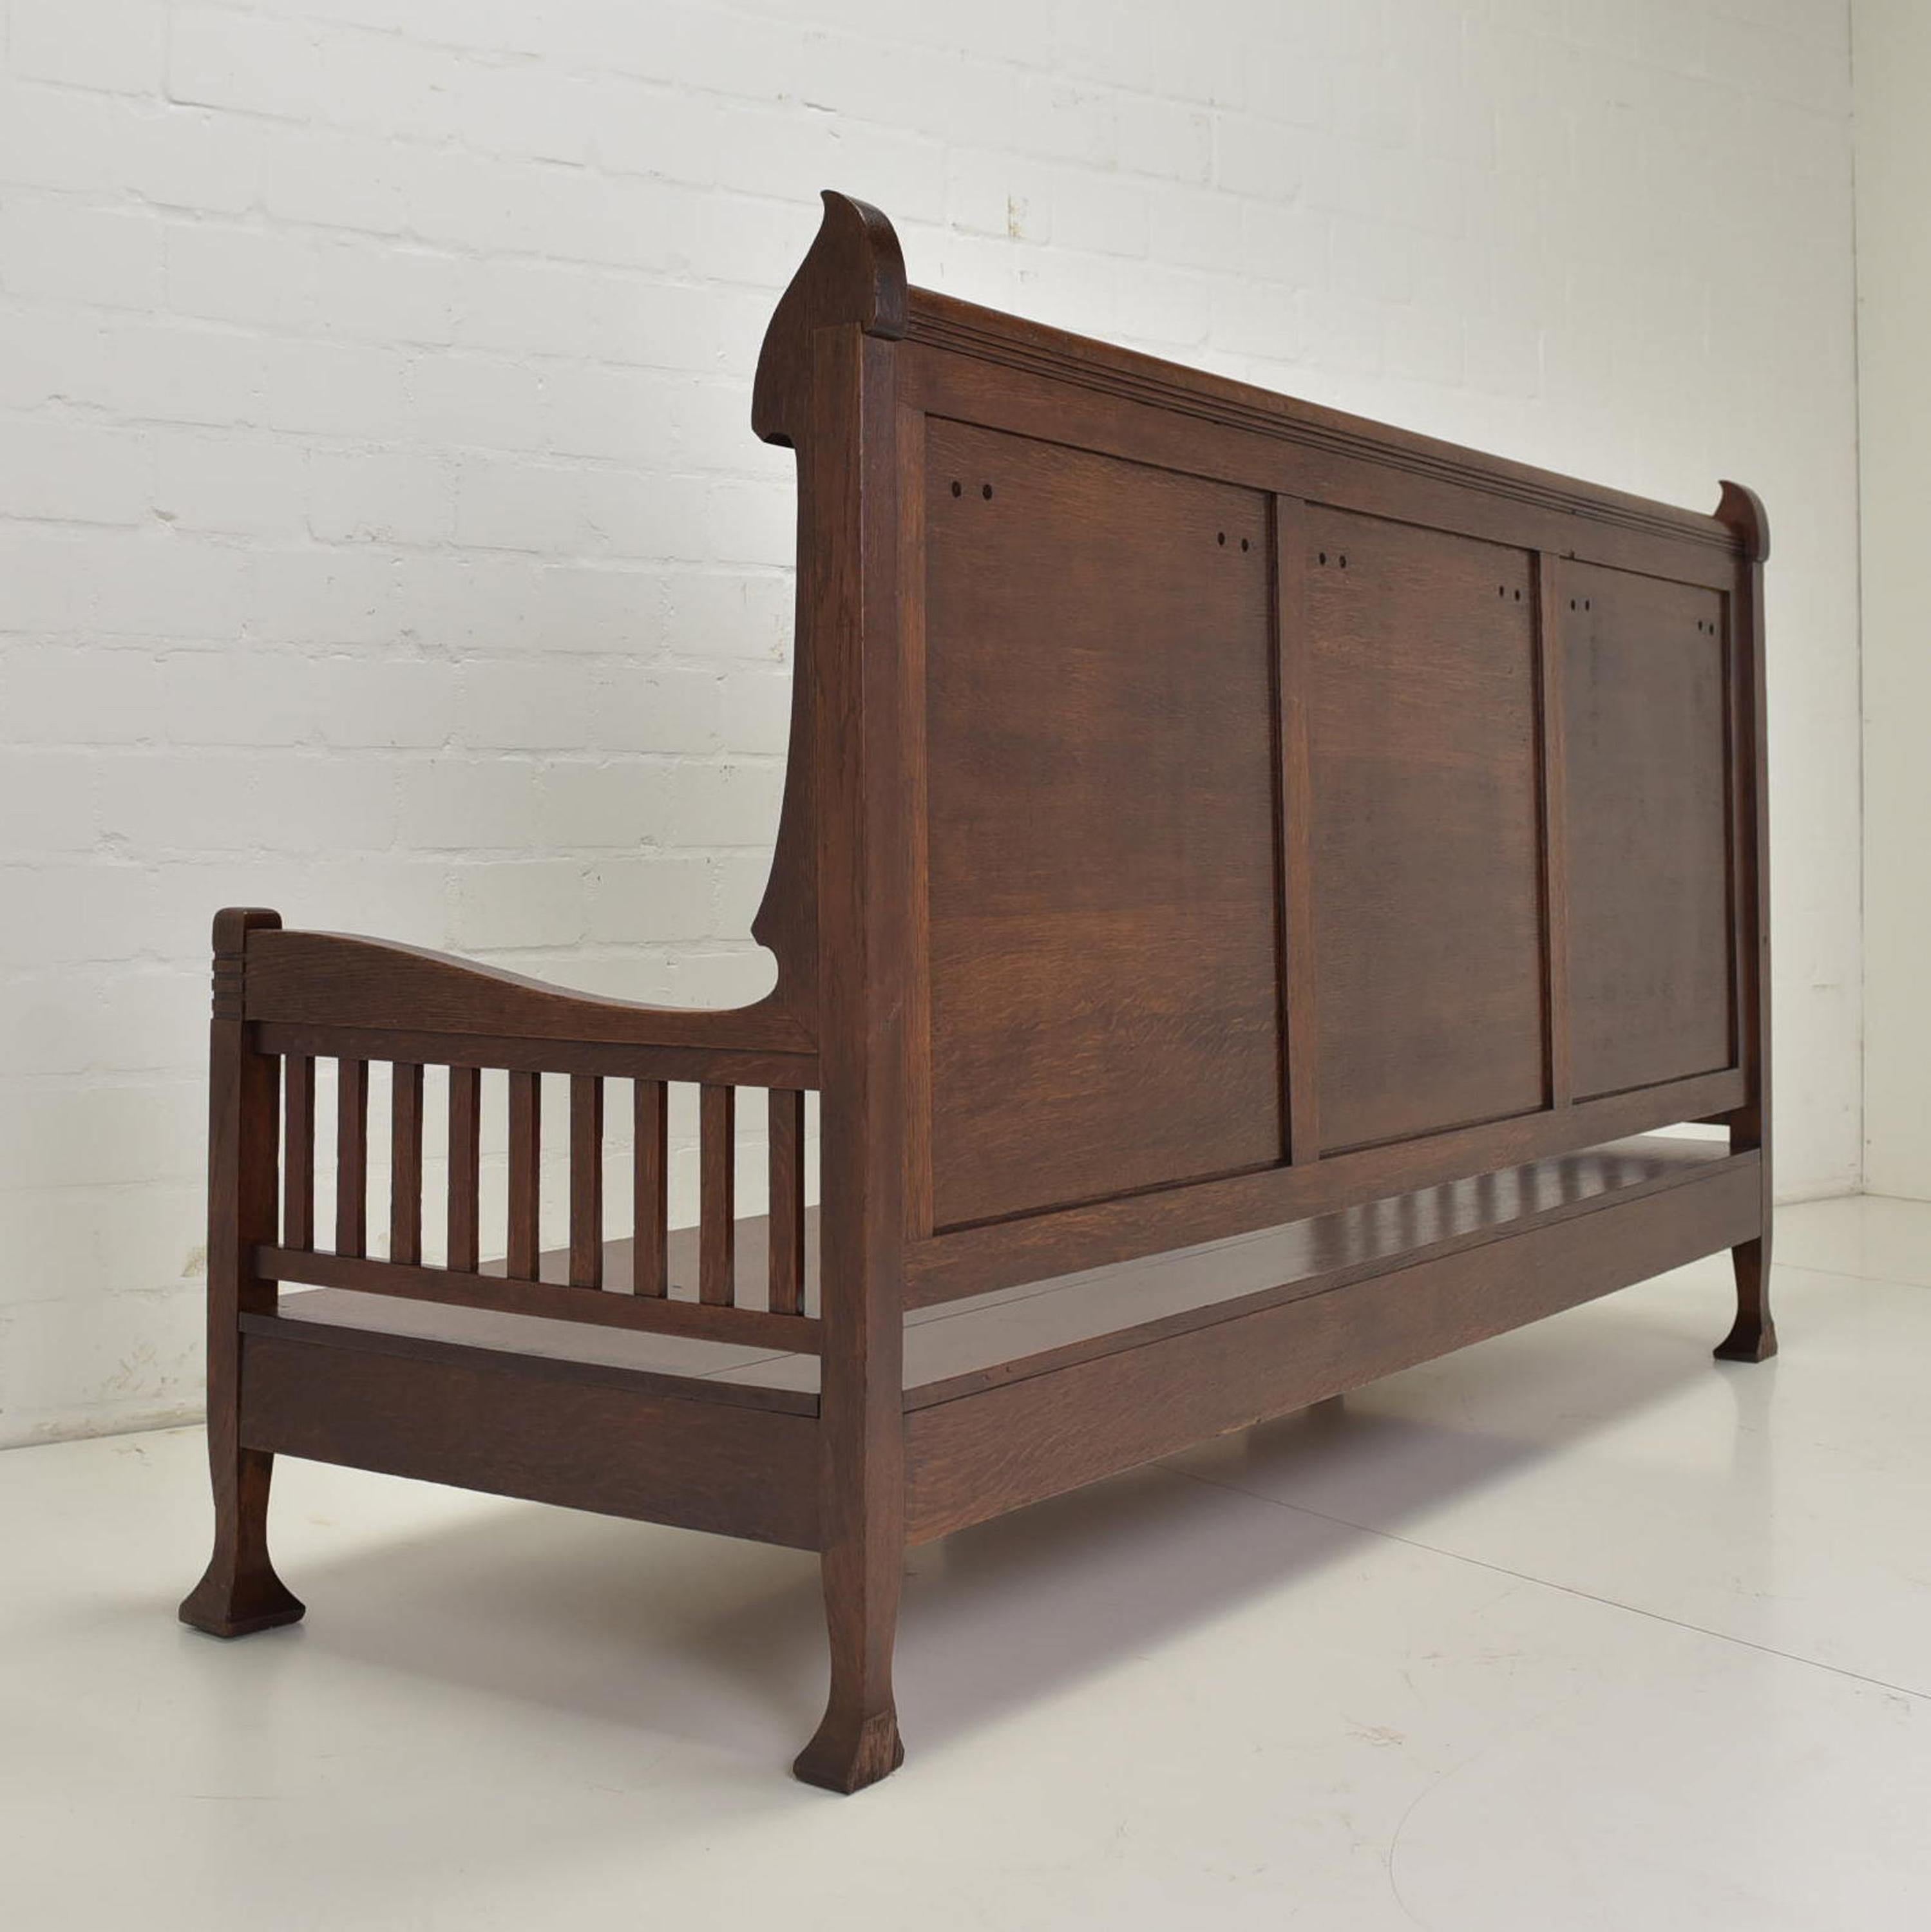 Art Nouveau Daybed in Solid Oak / Lounger Sofa, 1905 For Sale 6